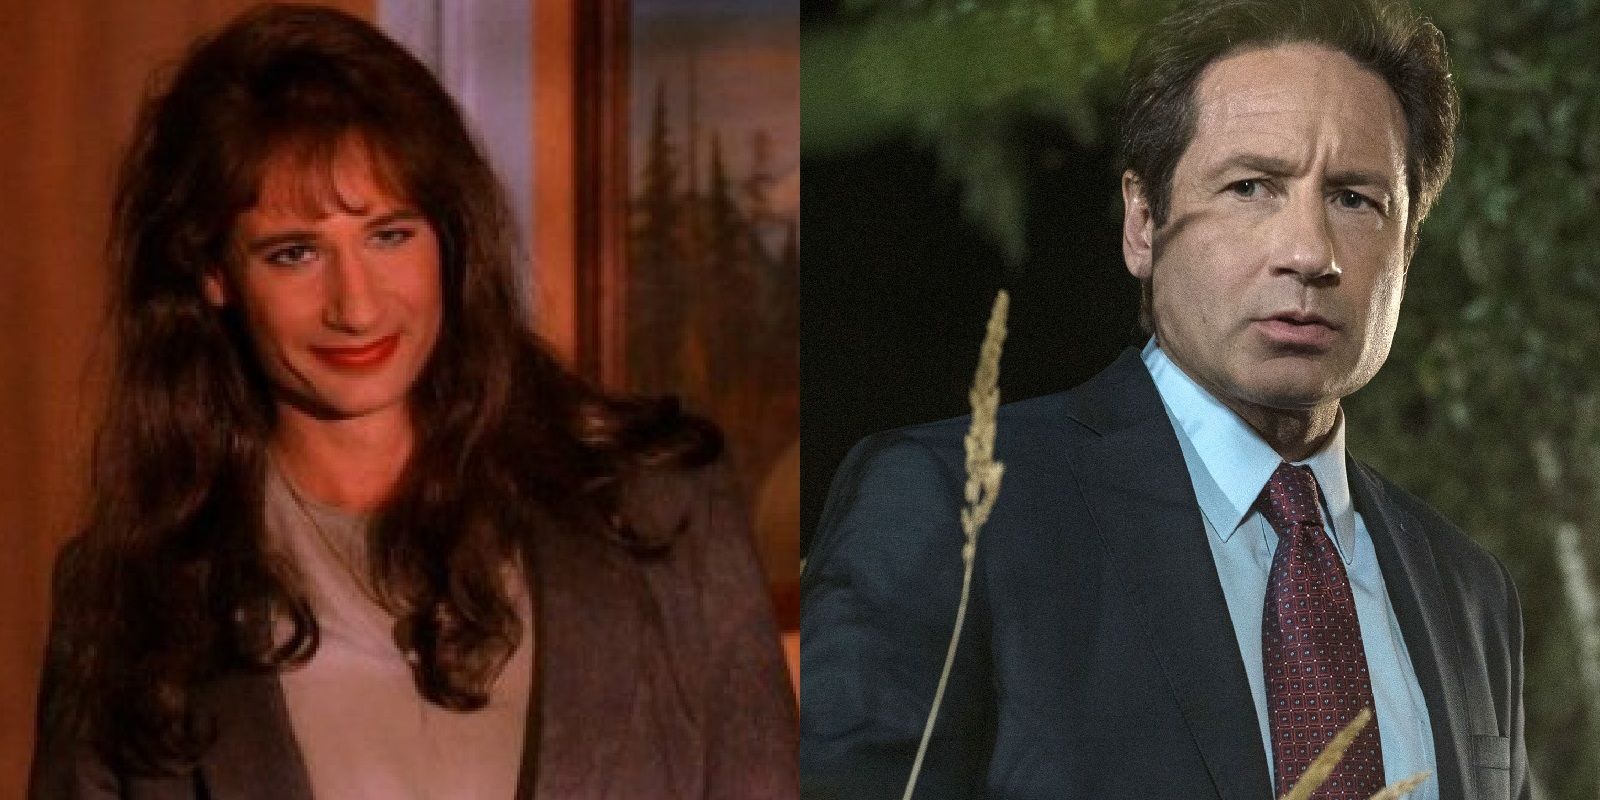 David Duchovny as Denise Bryson in Twin Peaks and Fox Mulder in The X-Files